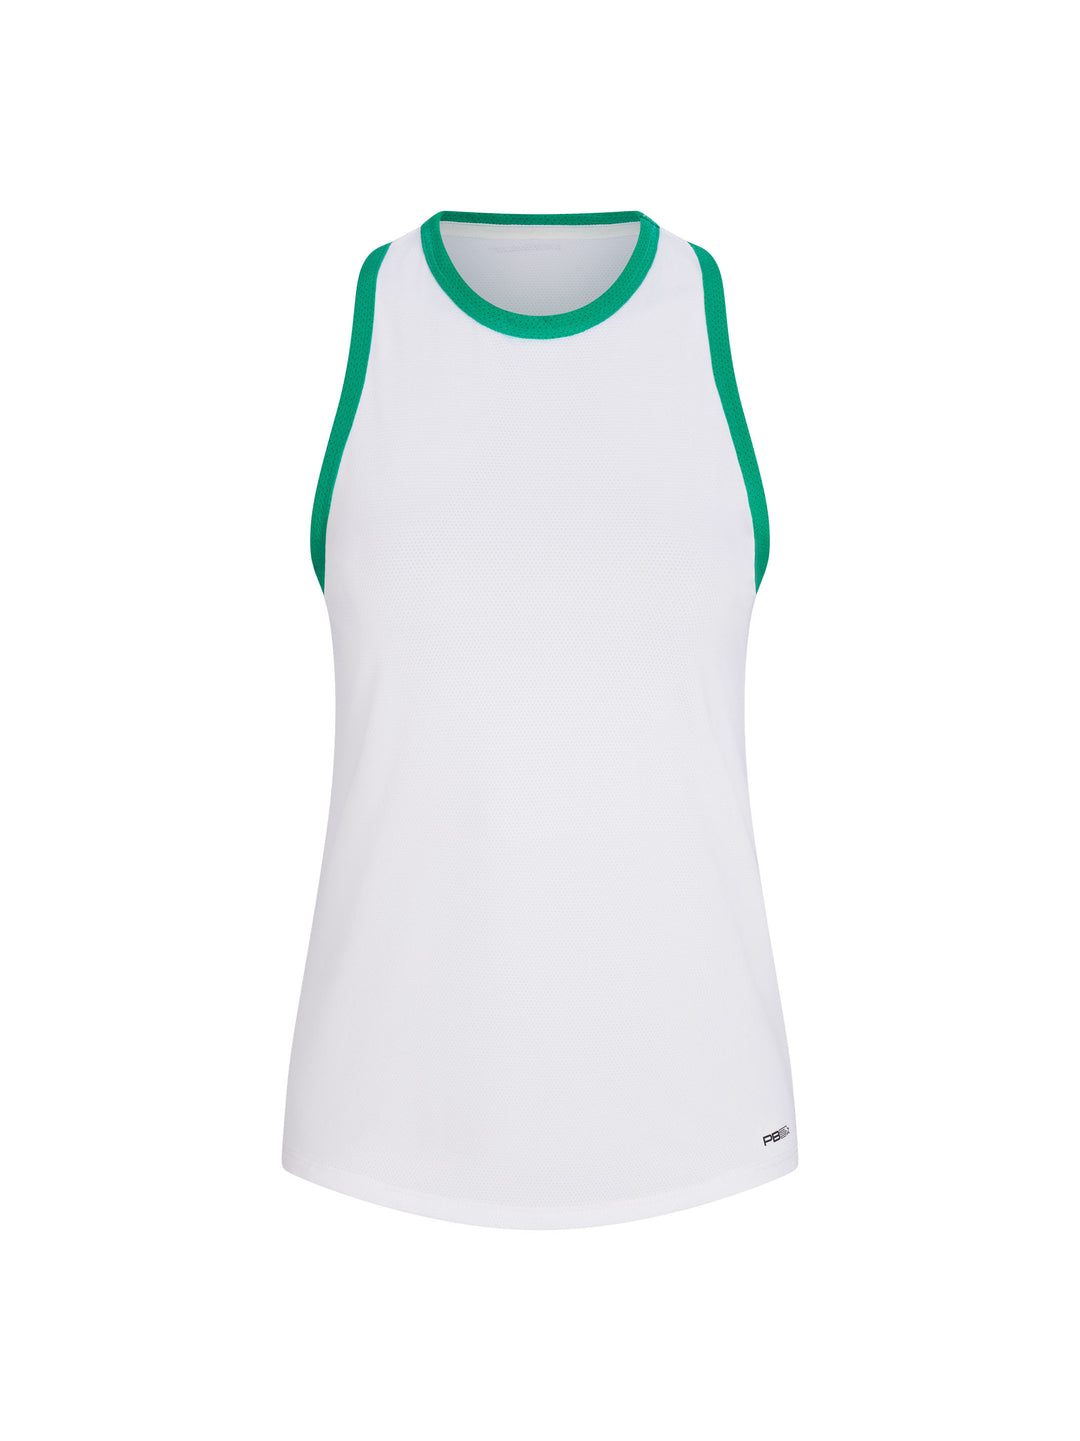 Women's Core Tank front view in White with Jade trim. Small logo printed on lower left front.